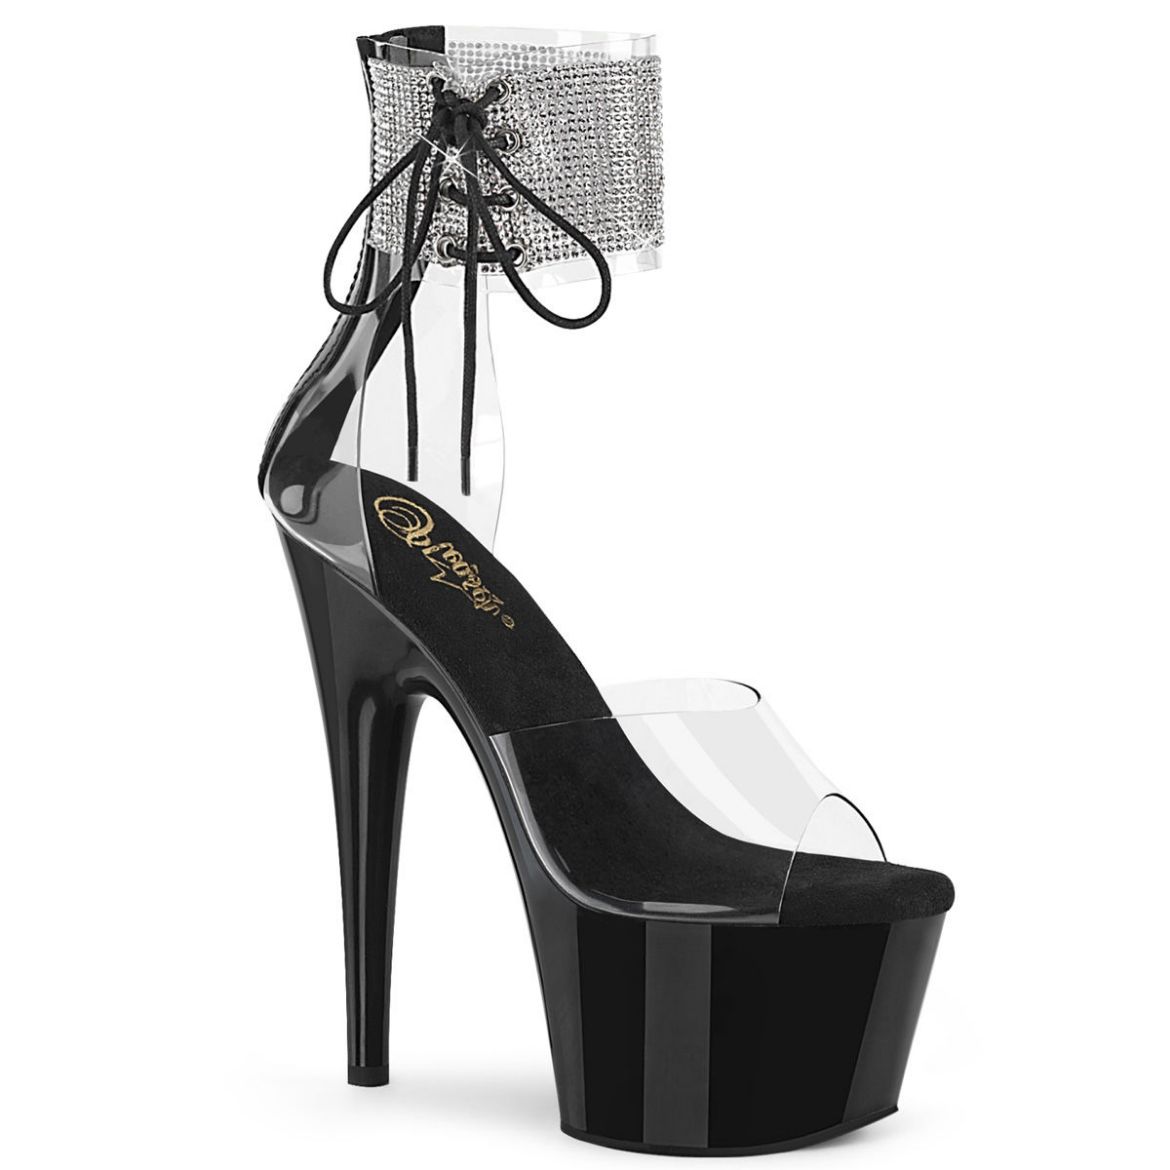 Product image of Pleaser ADORE-724RS Clear/Black 7 inch (17.8 cm) Heel 2 3/4 inch (7 cm) Platform Ankle Cuff Sandal With Rhinestones Back Zip Shoes